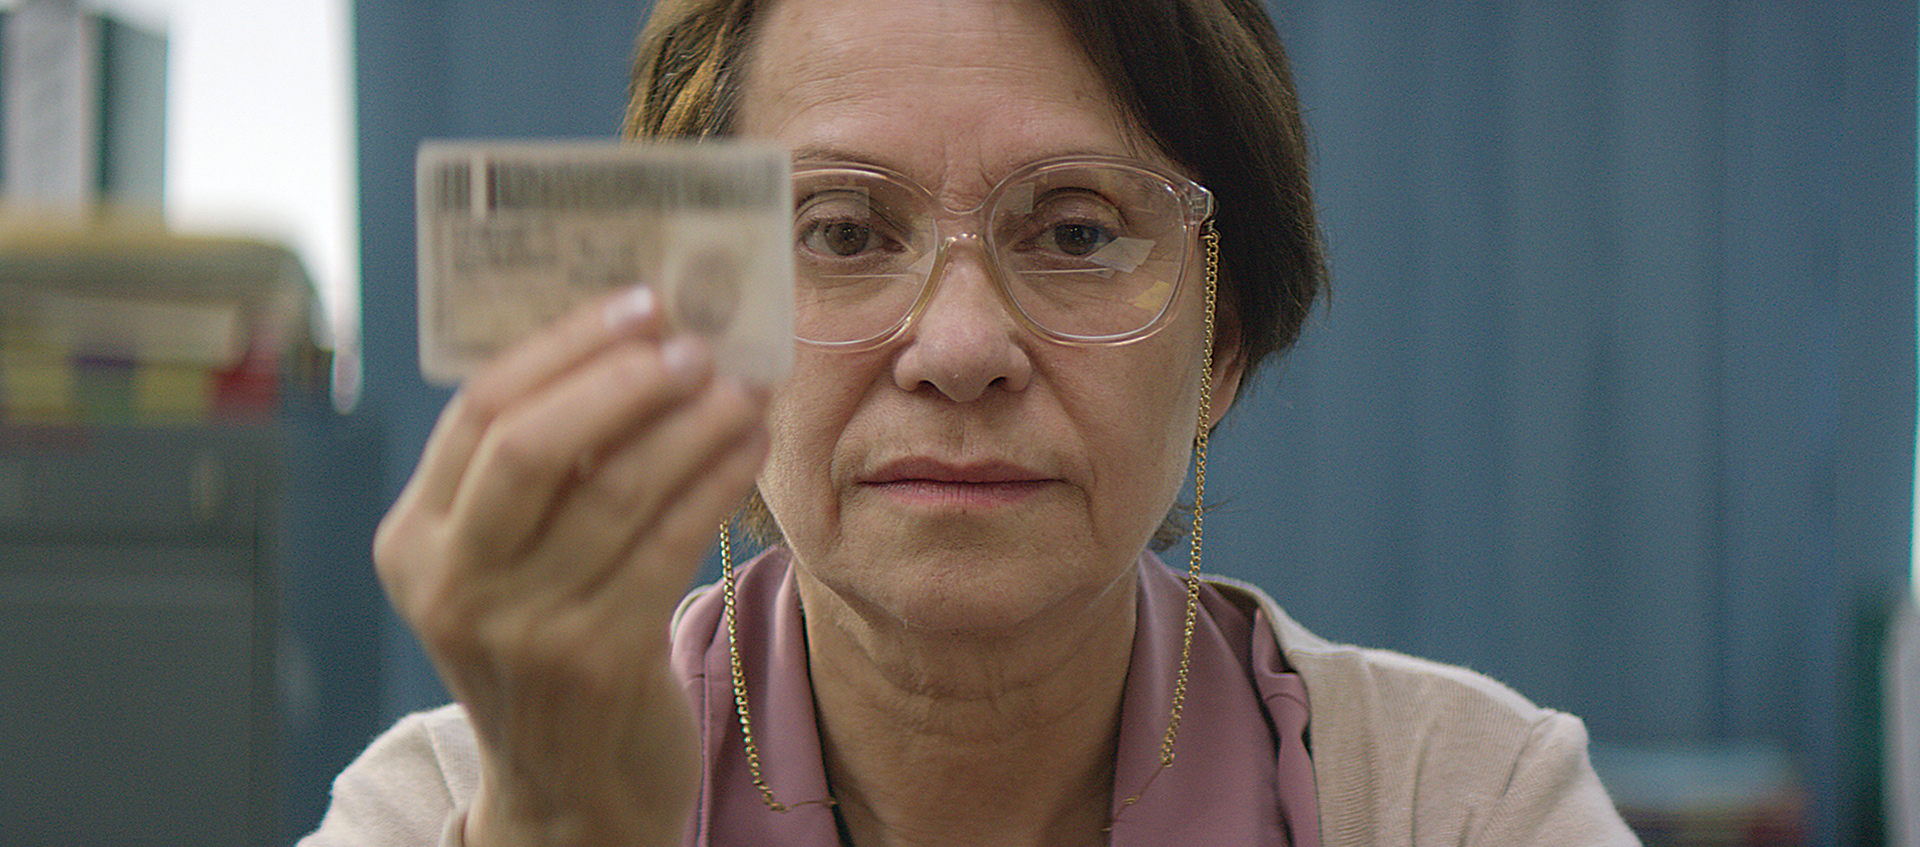 Older woman in glasses holding ID